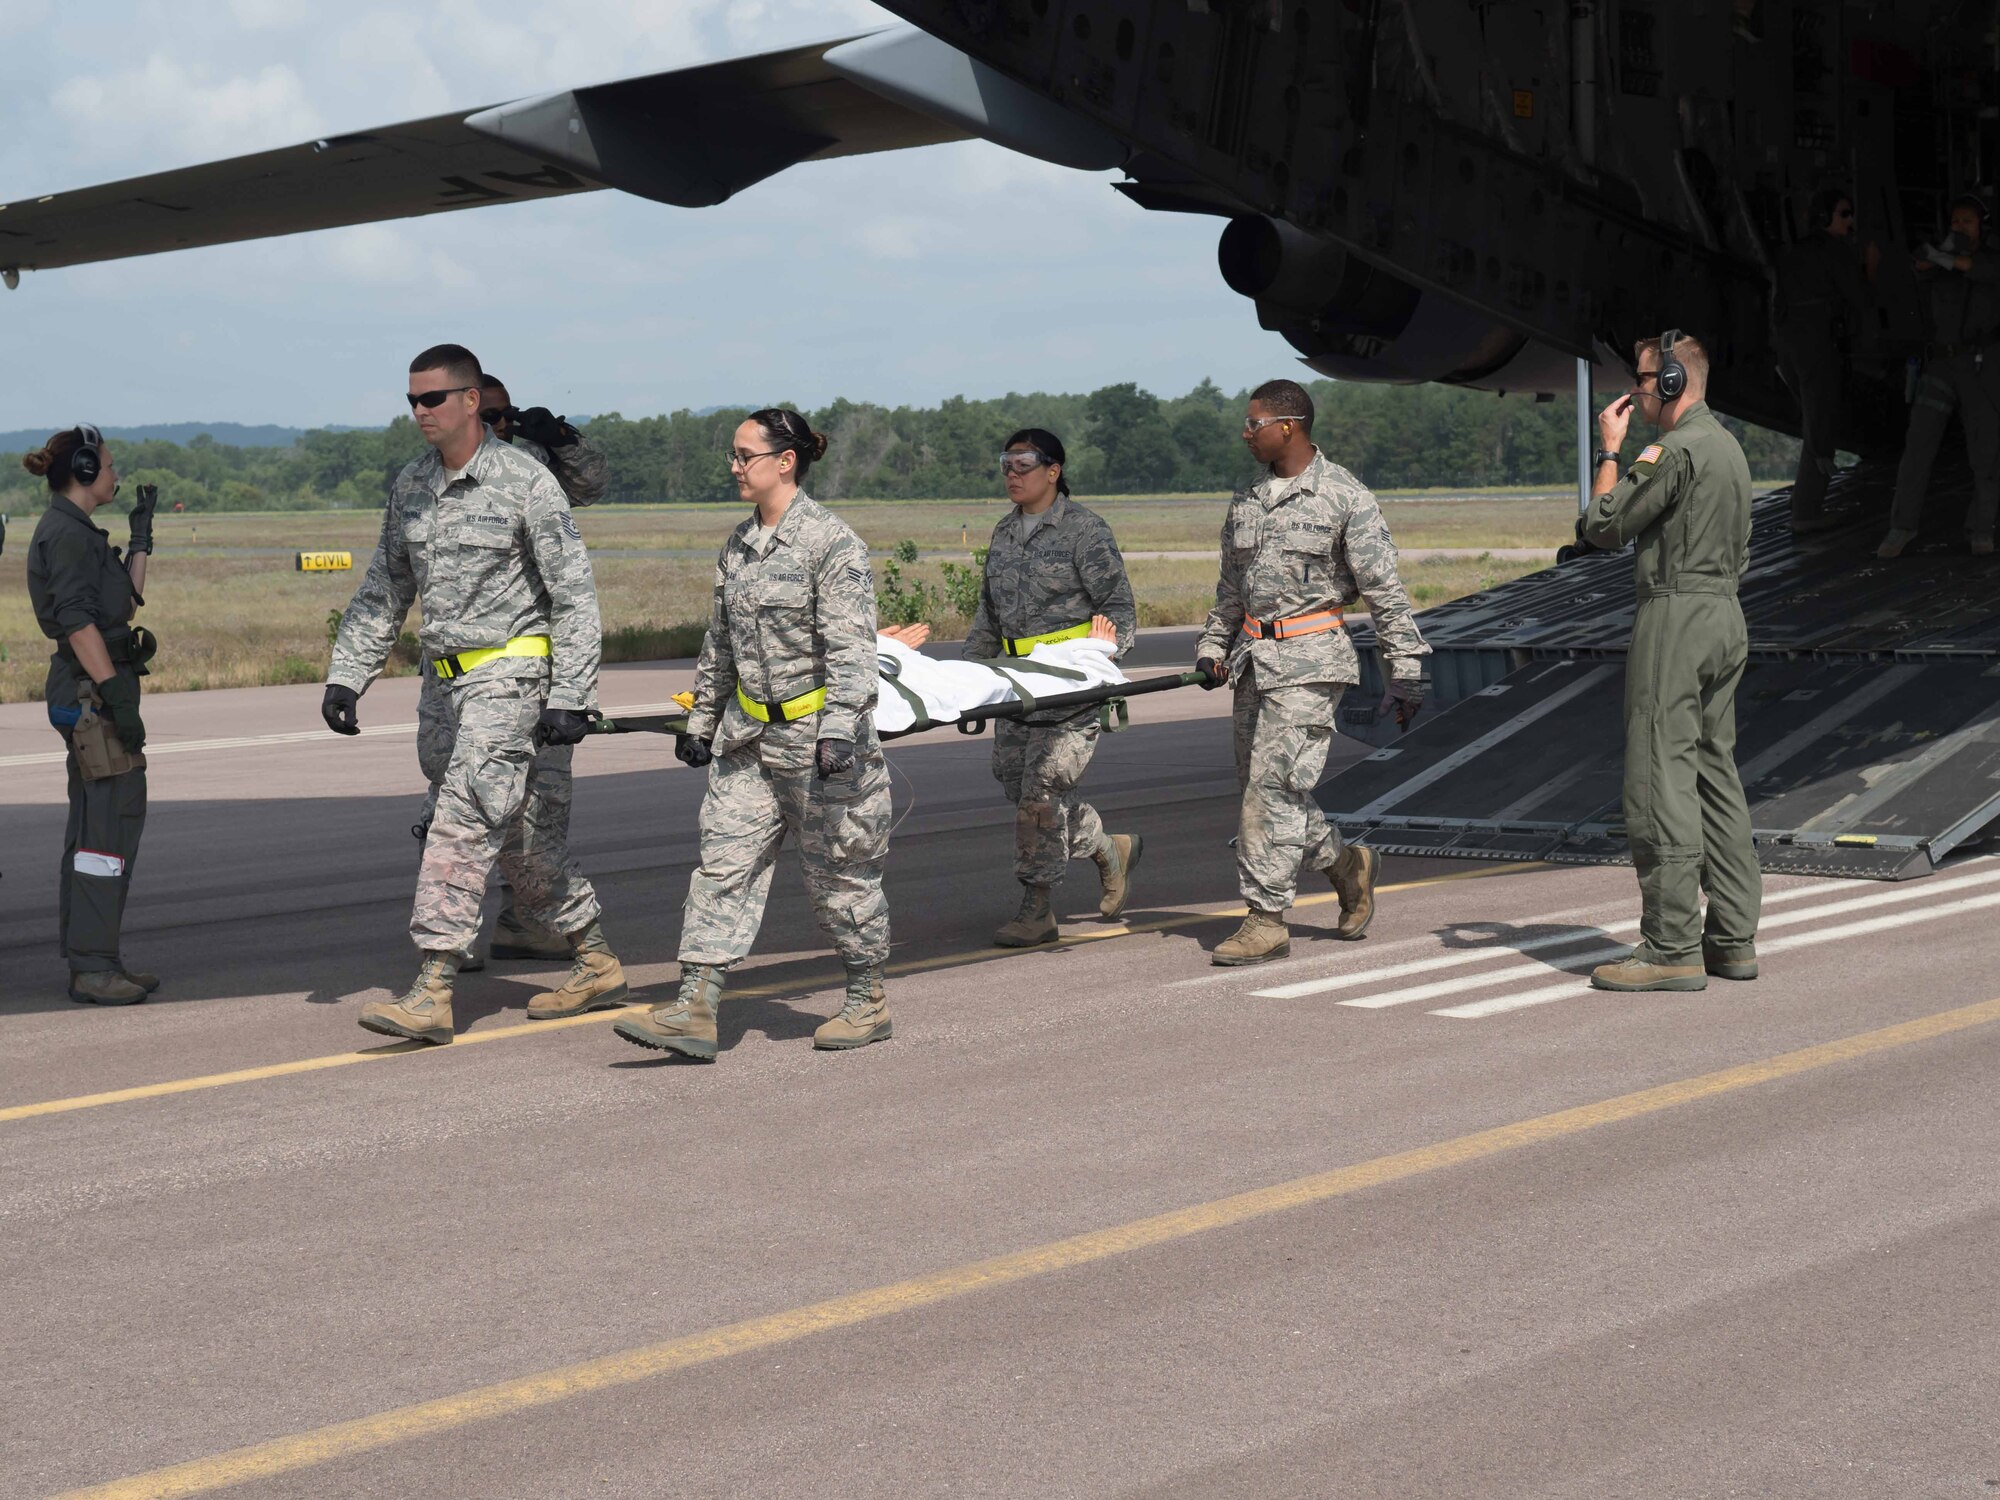 AES "patients" are carried off the C-17 at Fort McCoy to be returned to duty when ready. (Air Force Photo/Paul Zadach)